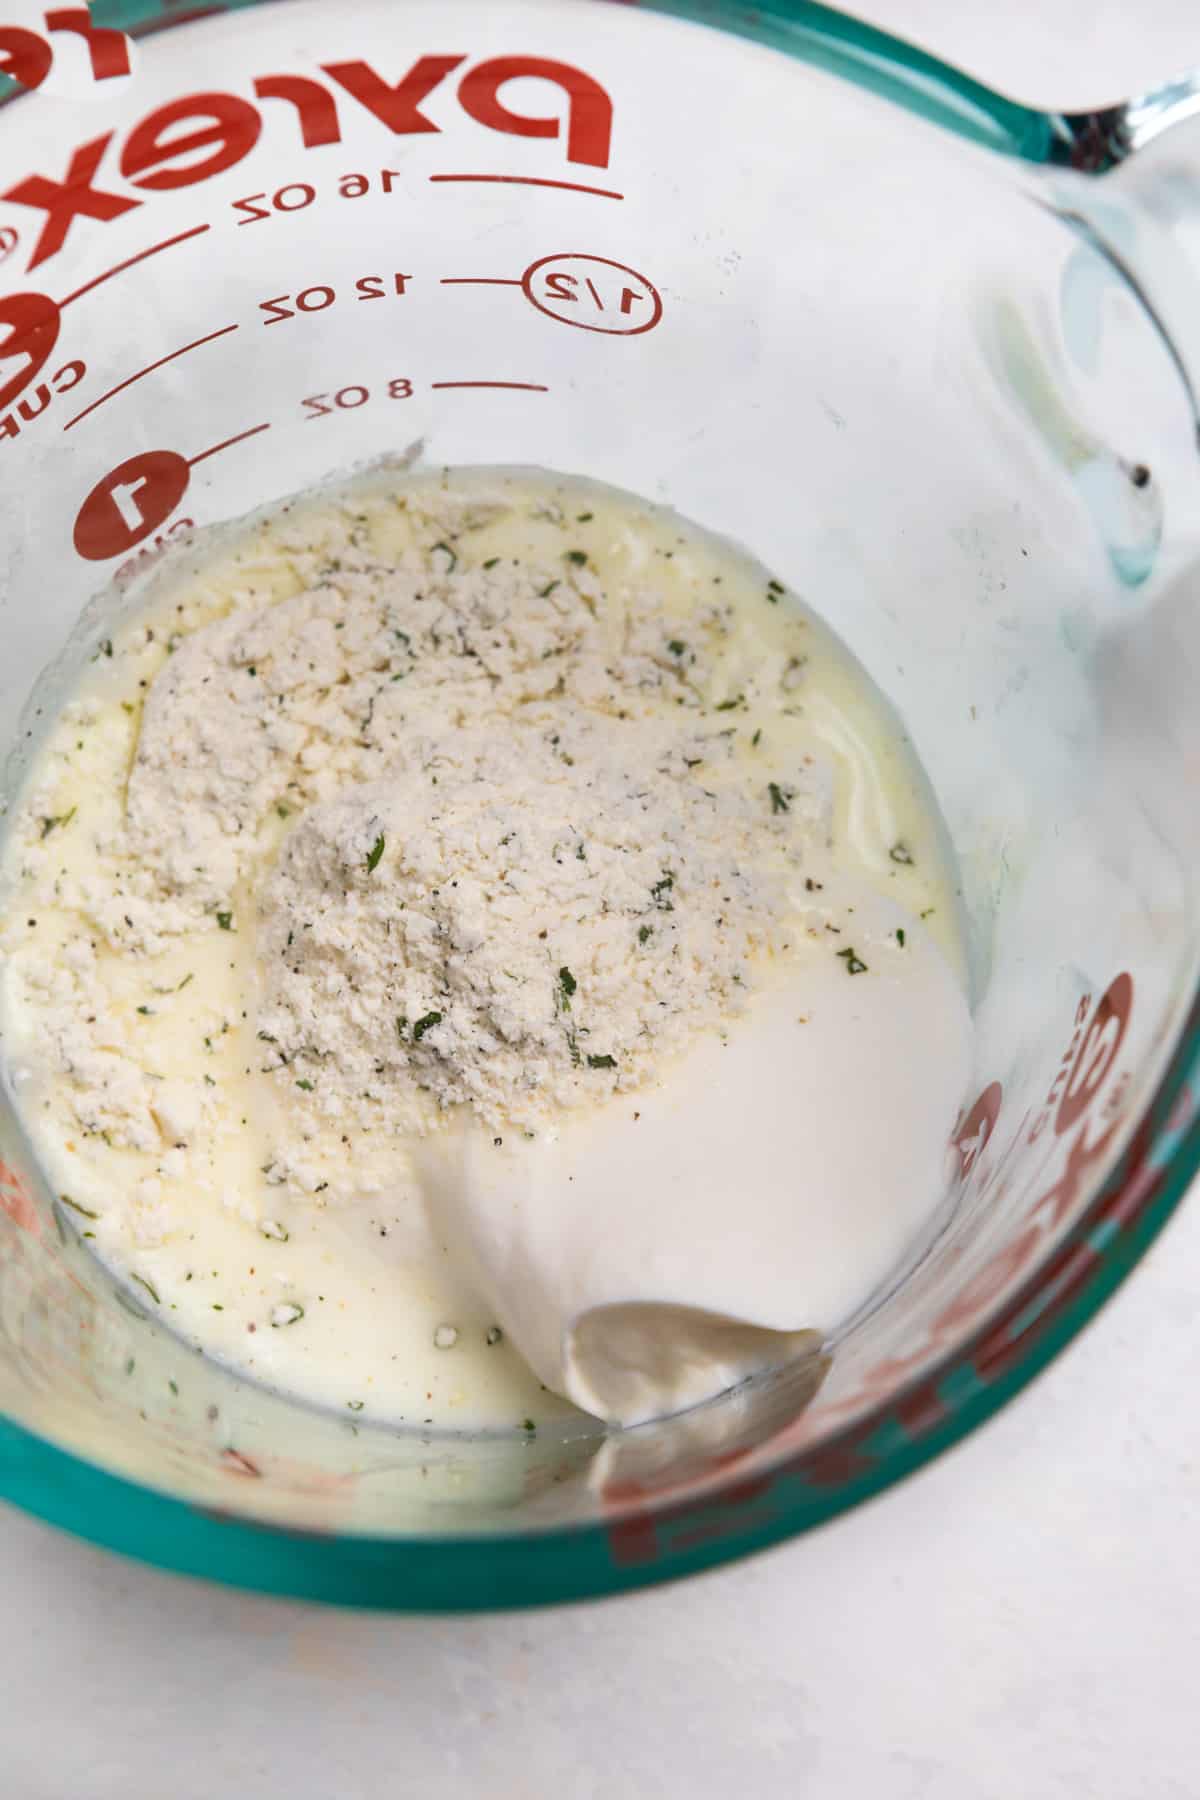 Pyrex measuring cup with ranch dressing ingredients.